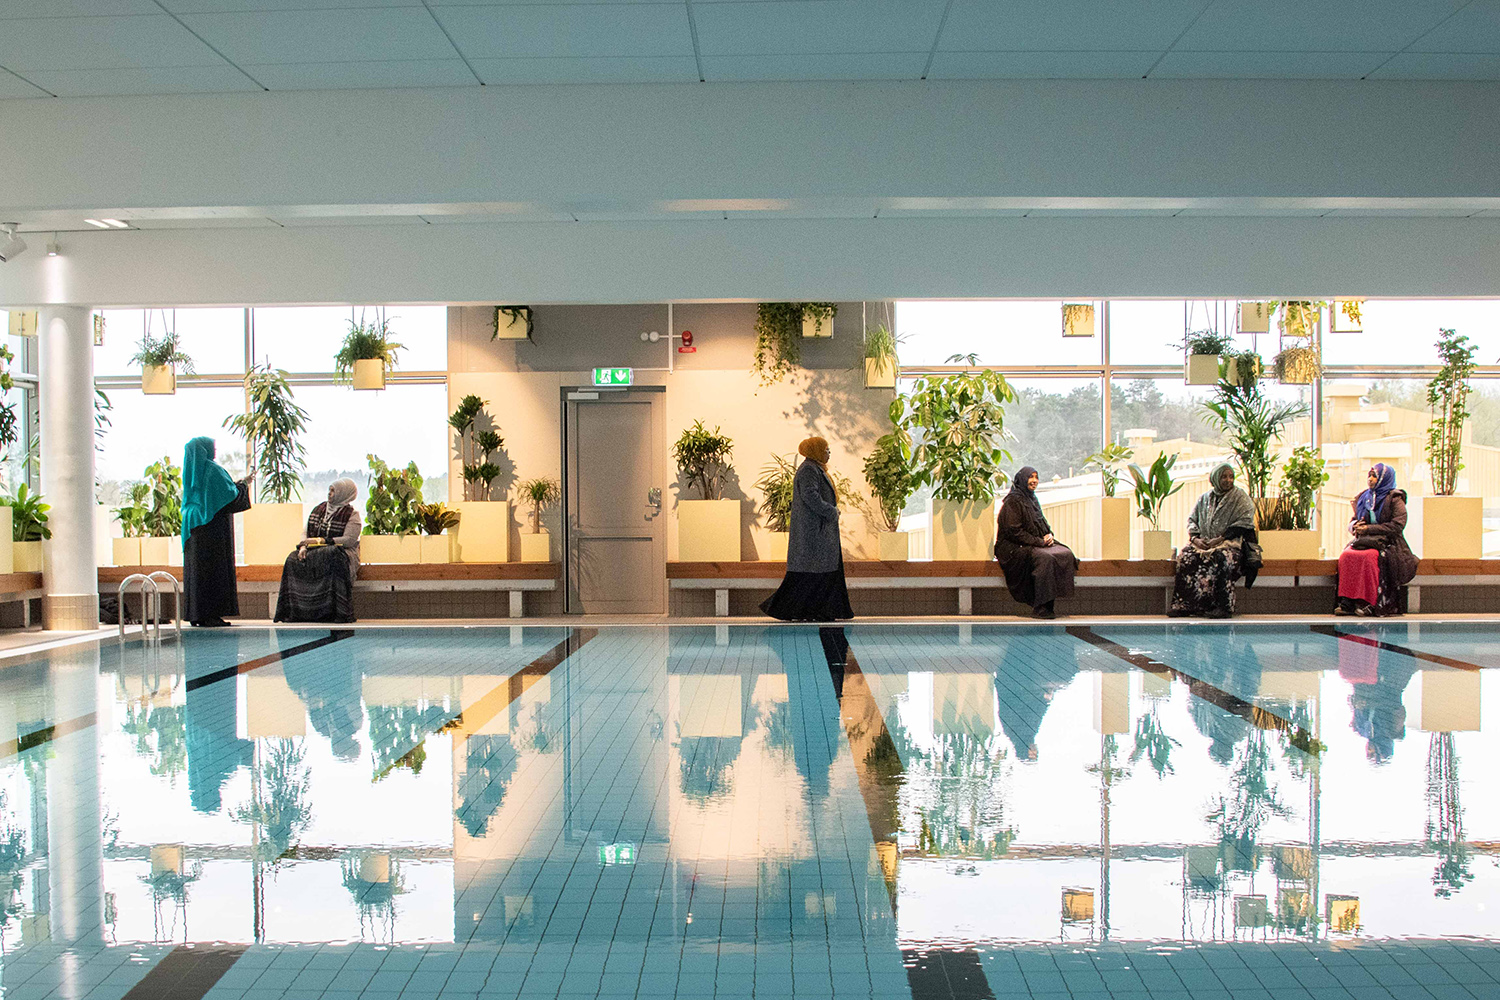 An indoor swimming pool with several women in the background and green plants.